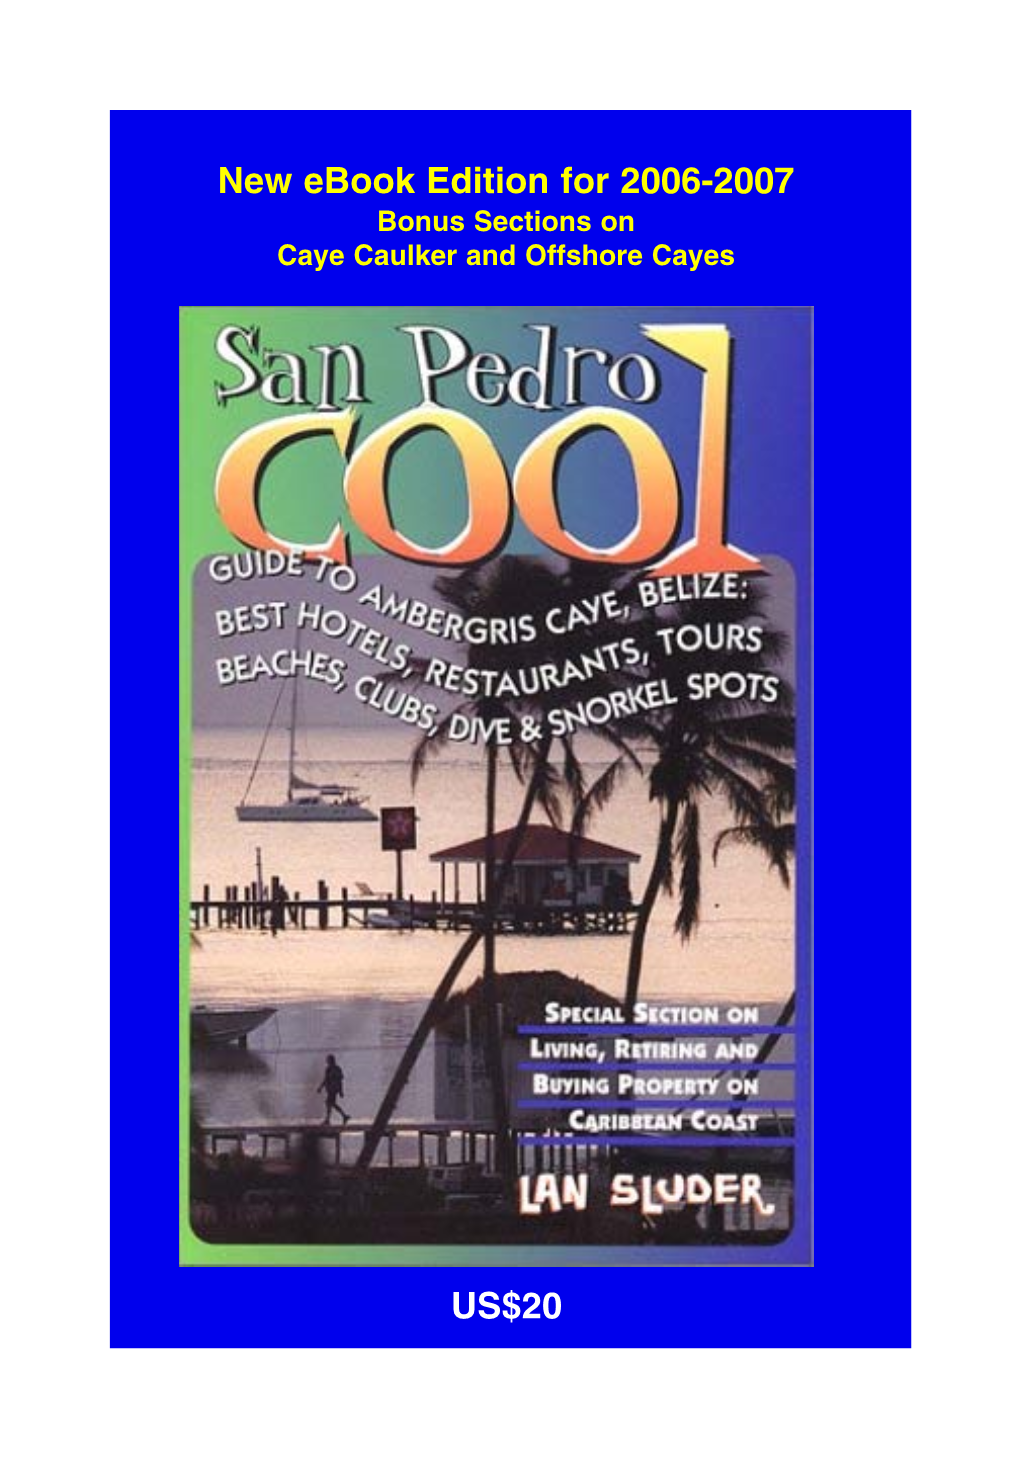 New Ebook Edition for 2006-2007 US$20